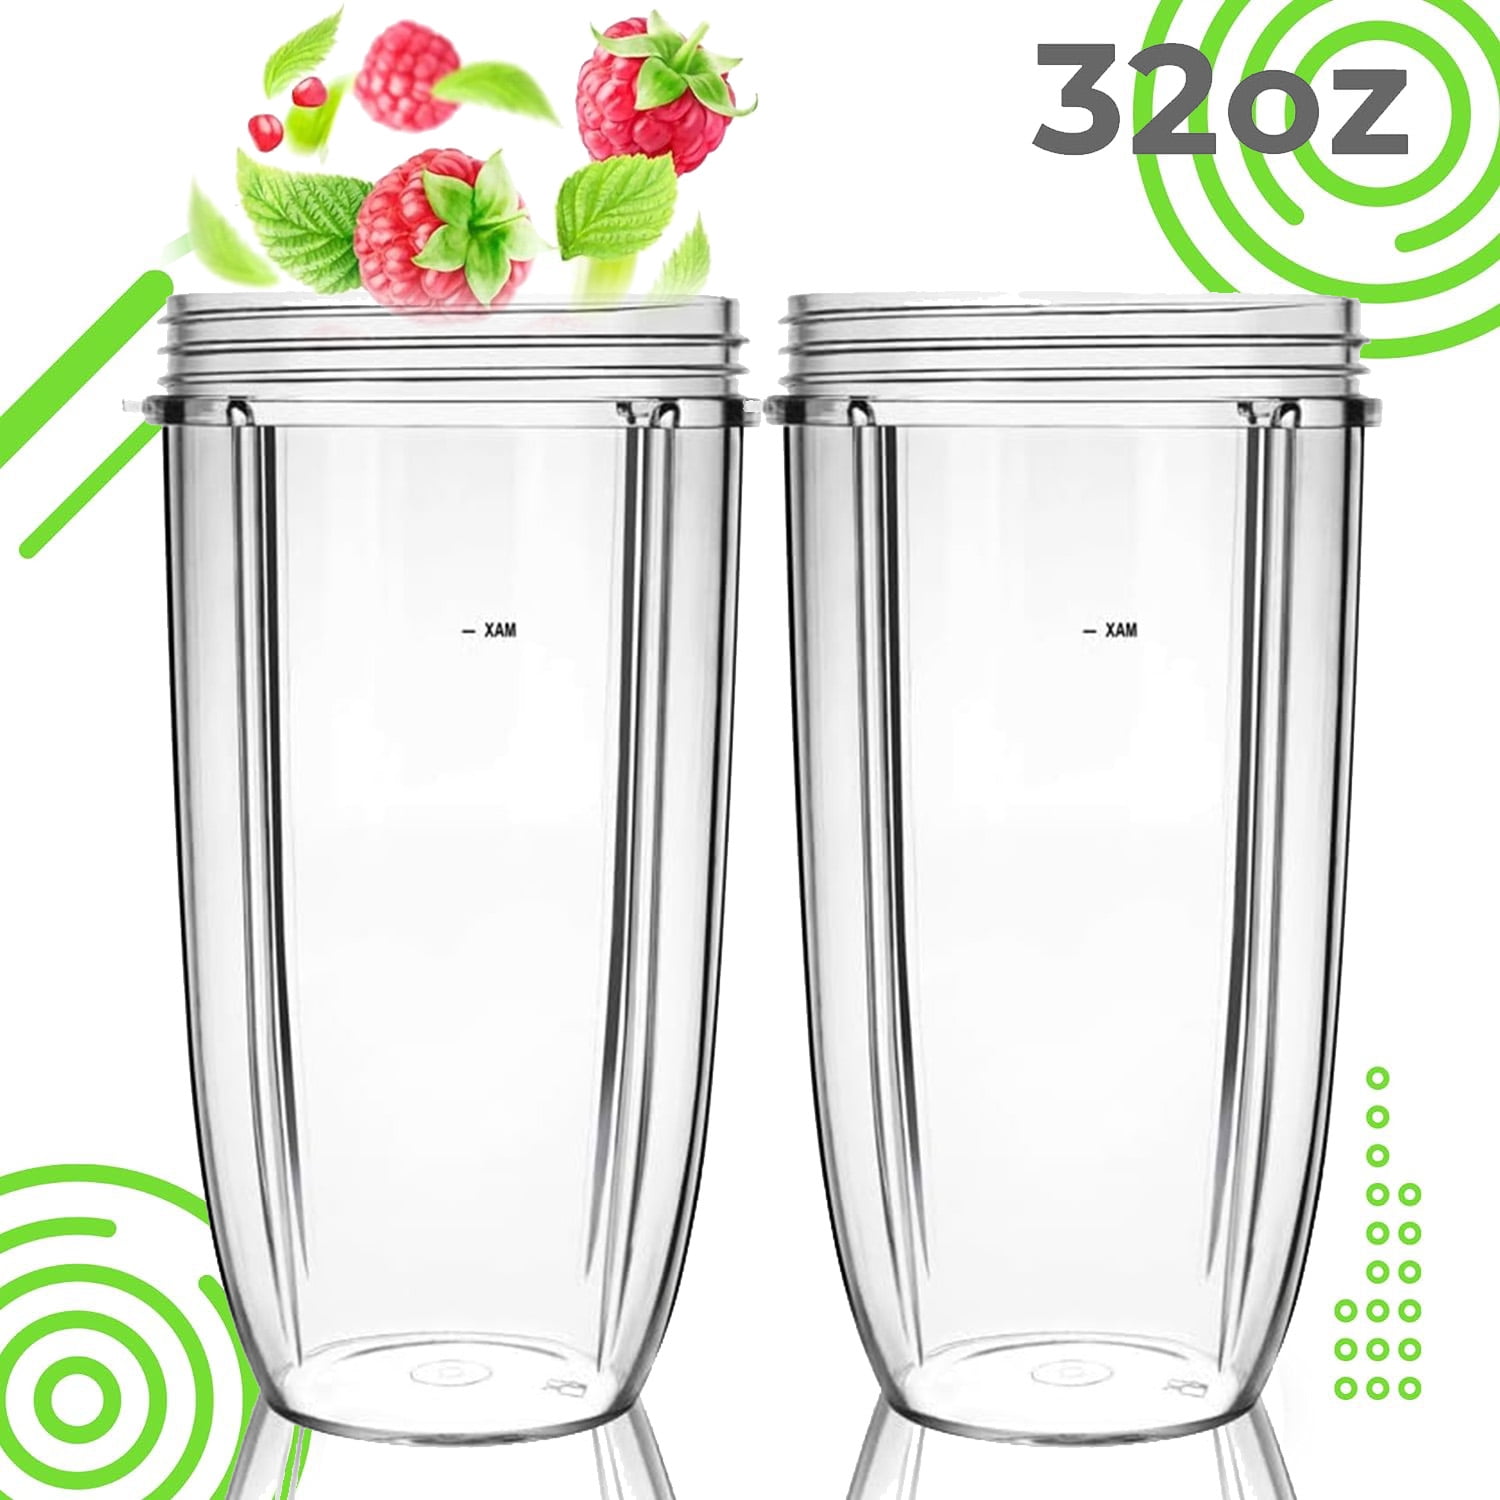 UPGRADE Replacement 32oz NutriBullet Blender Cups & Blade Part Compatible  with 600w/900w Blender (7 Pieces) 